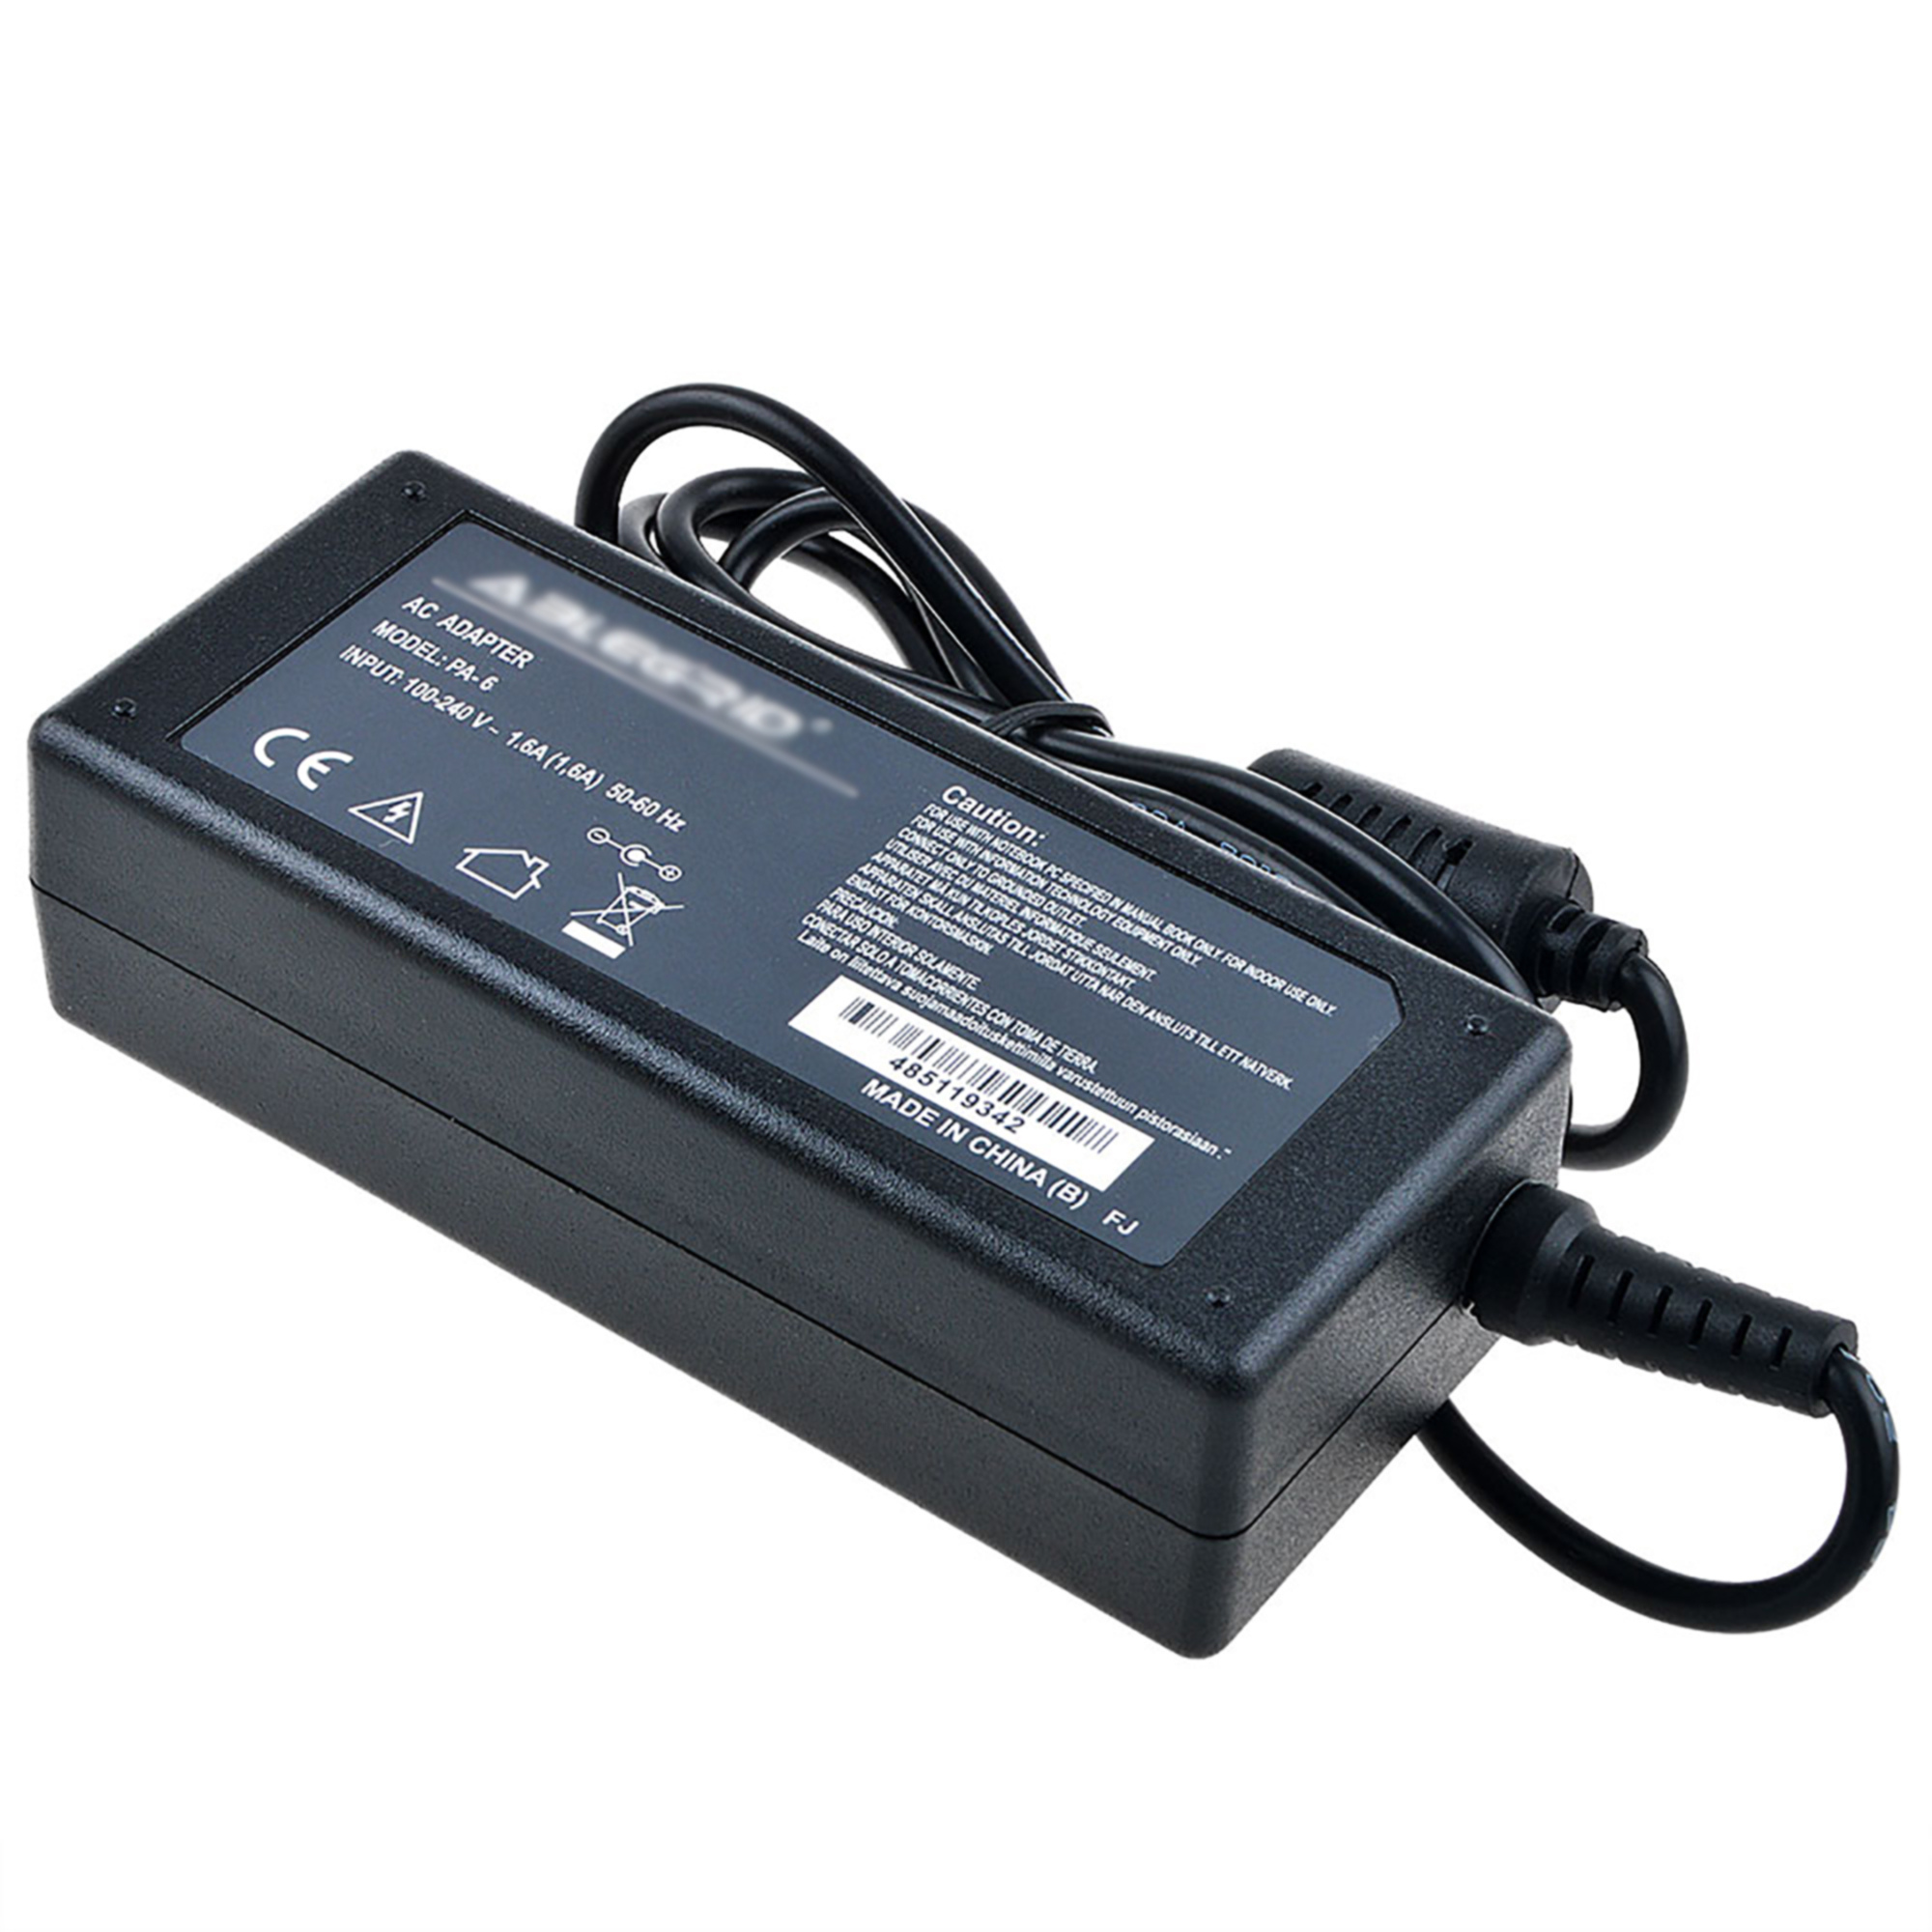 PKPOWER AC DC Adapter Replacement for LG SL6Y 3.1 Channel High-Resolution Sound Bar SoundBar Power - image 3 of 5